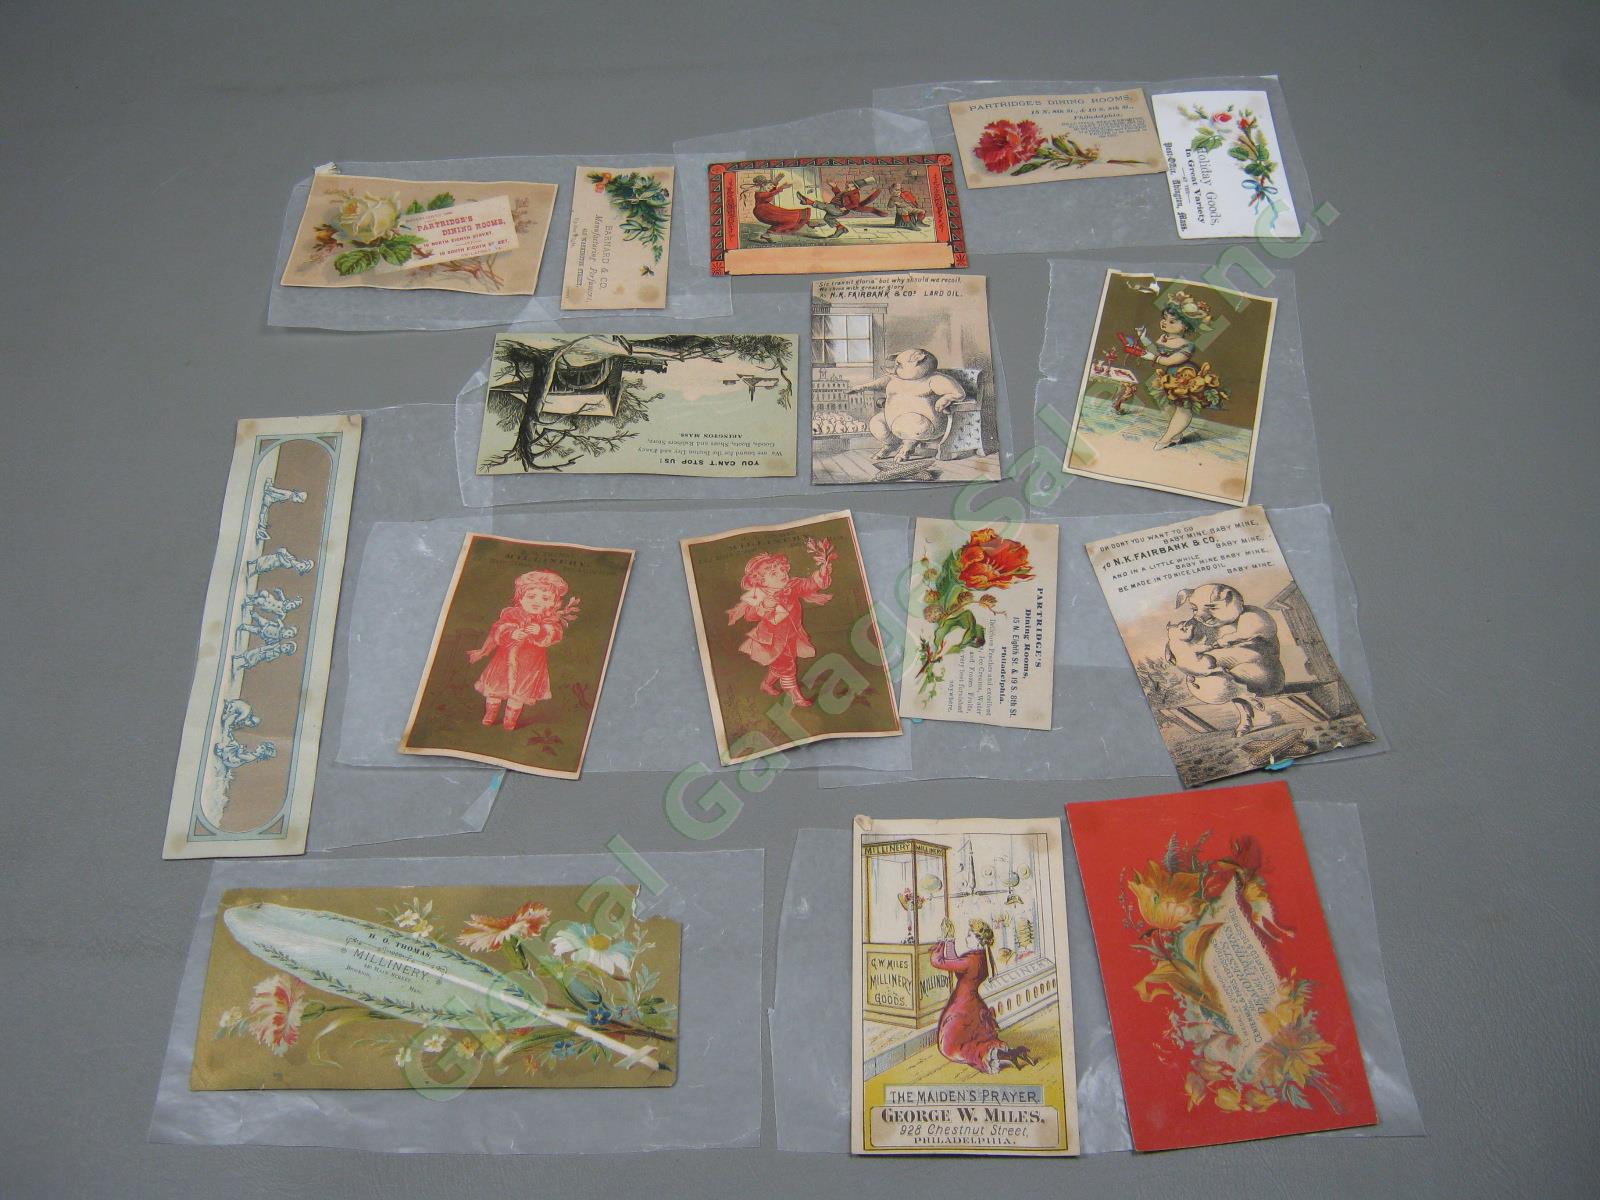 Huge Lot Assorted Vintage Antique Victorian Advertising Trade Cards Collection + 8